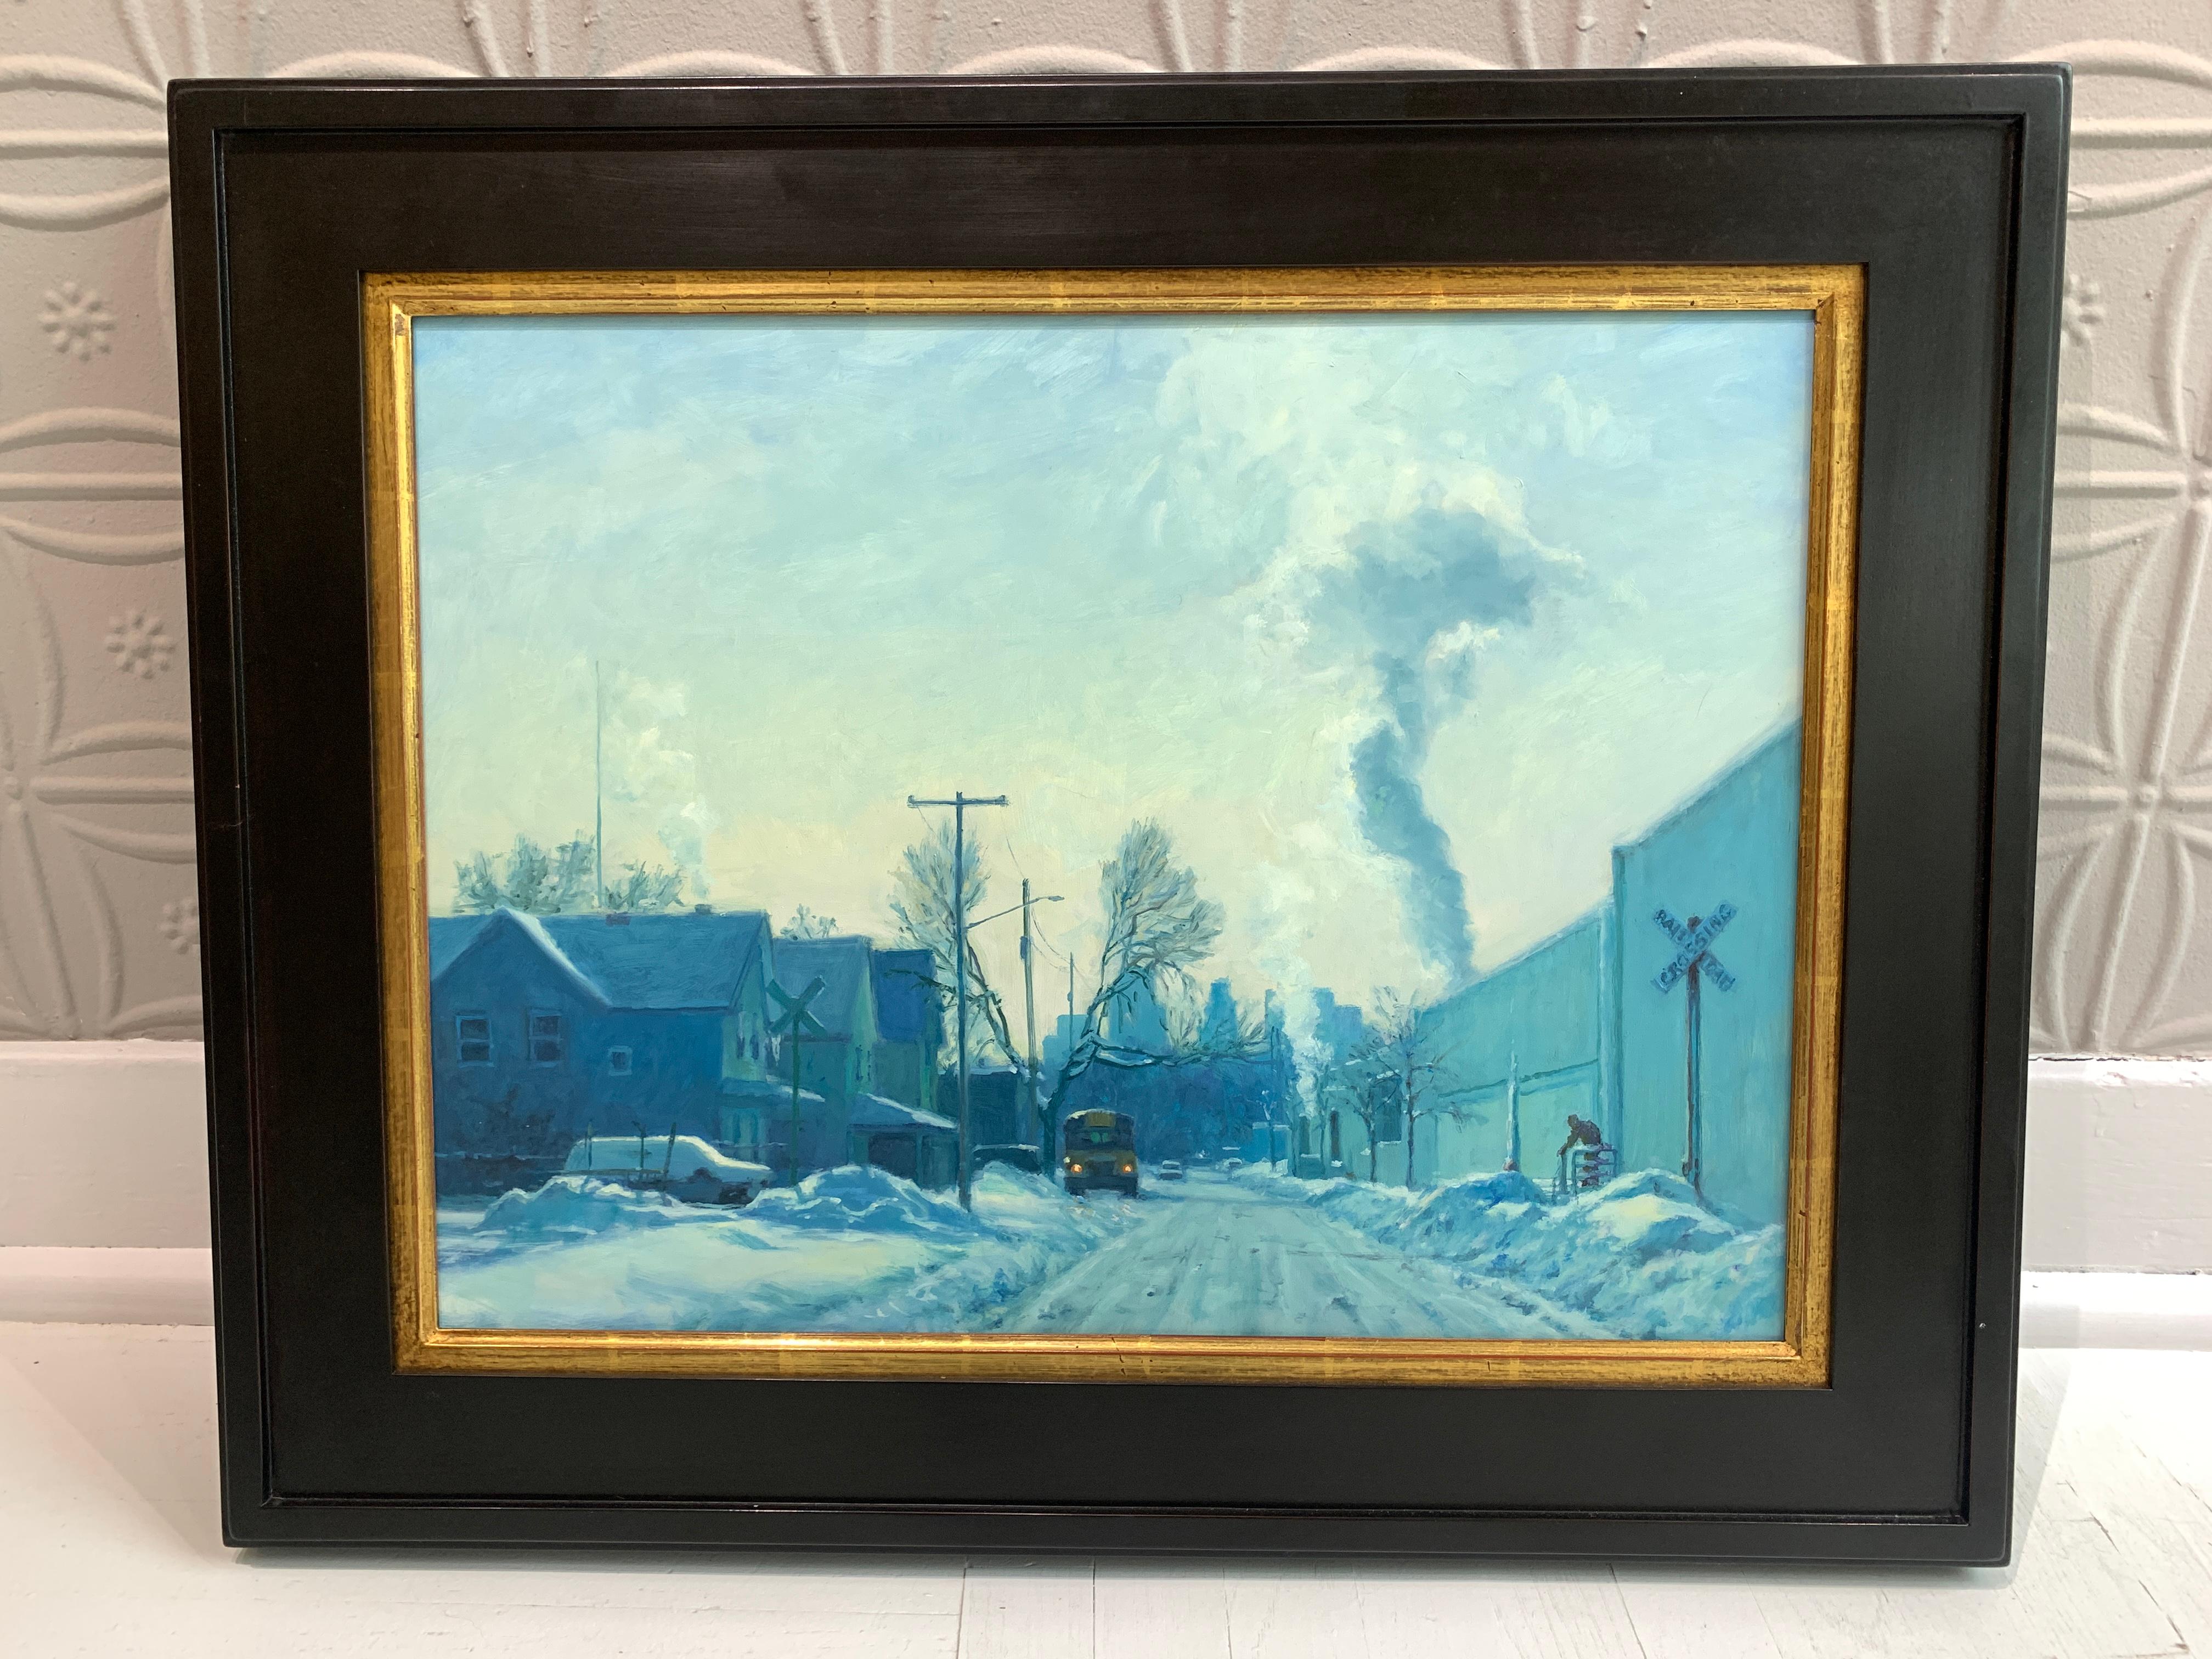 Cold Day by the Tracks - Painting by Carl Bretzke